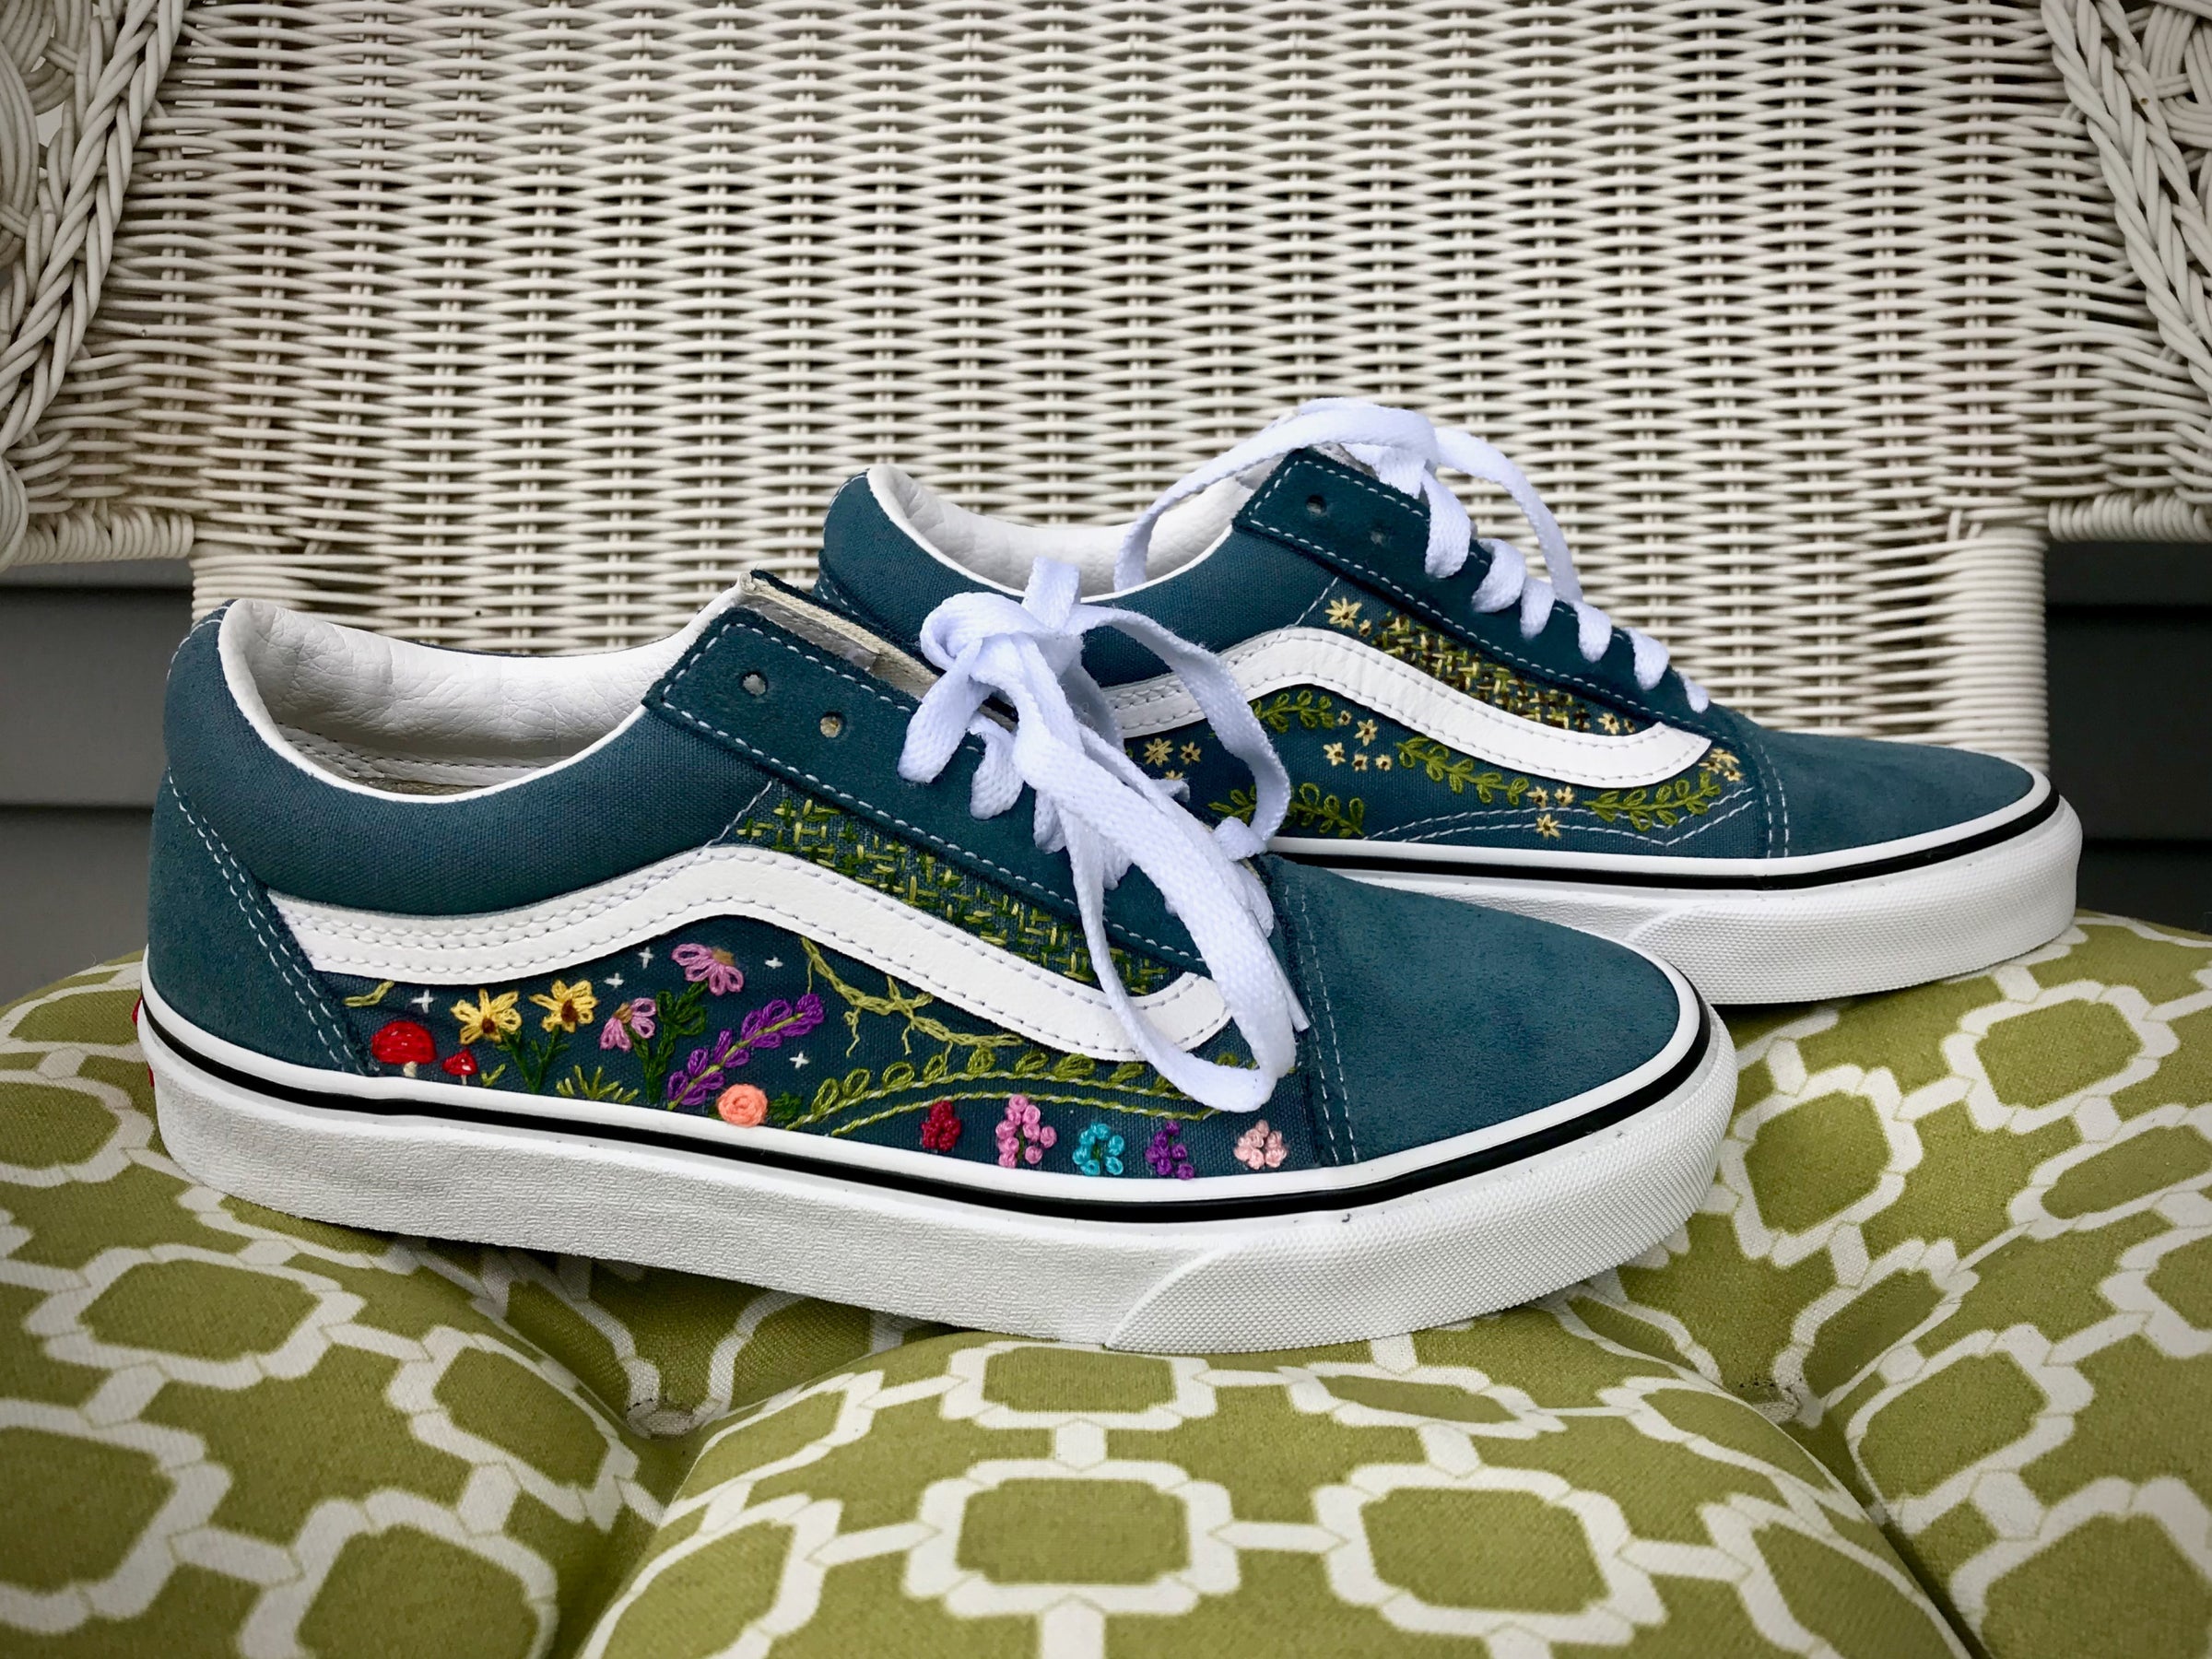 Flower Themed Embroidered Vans Gillian's Shoes